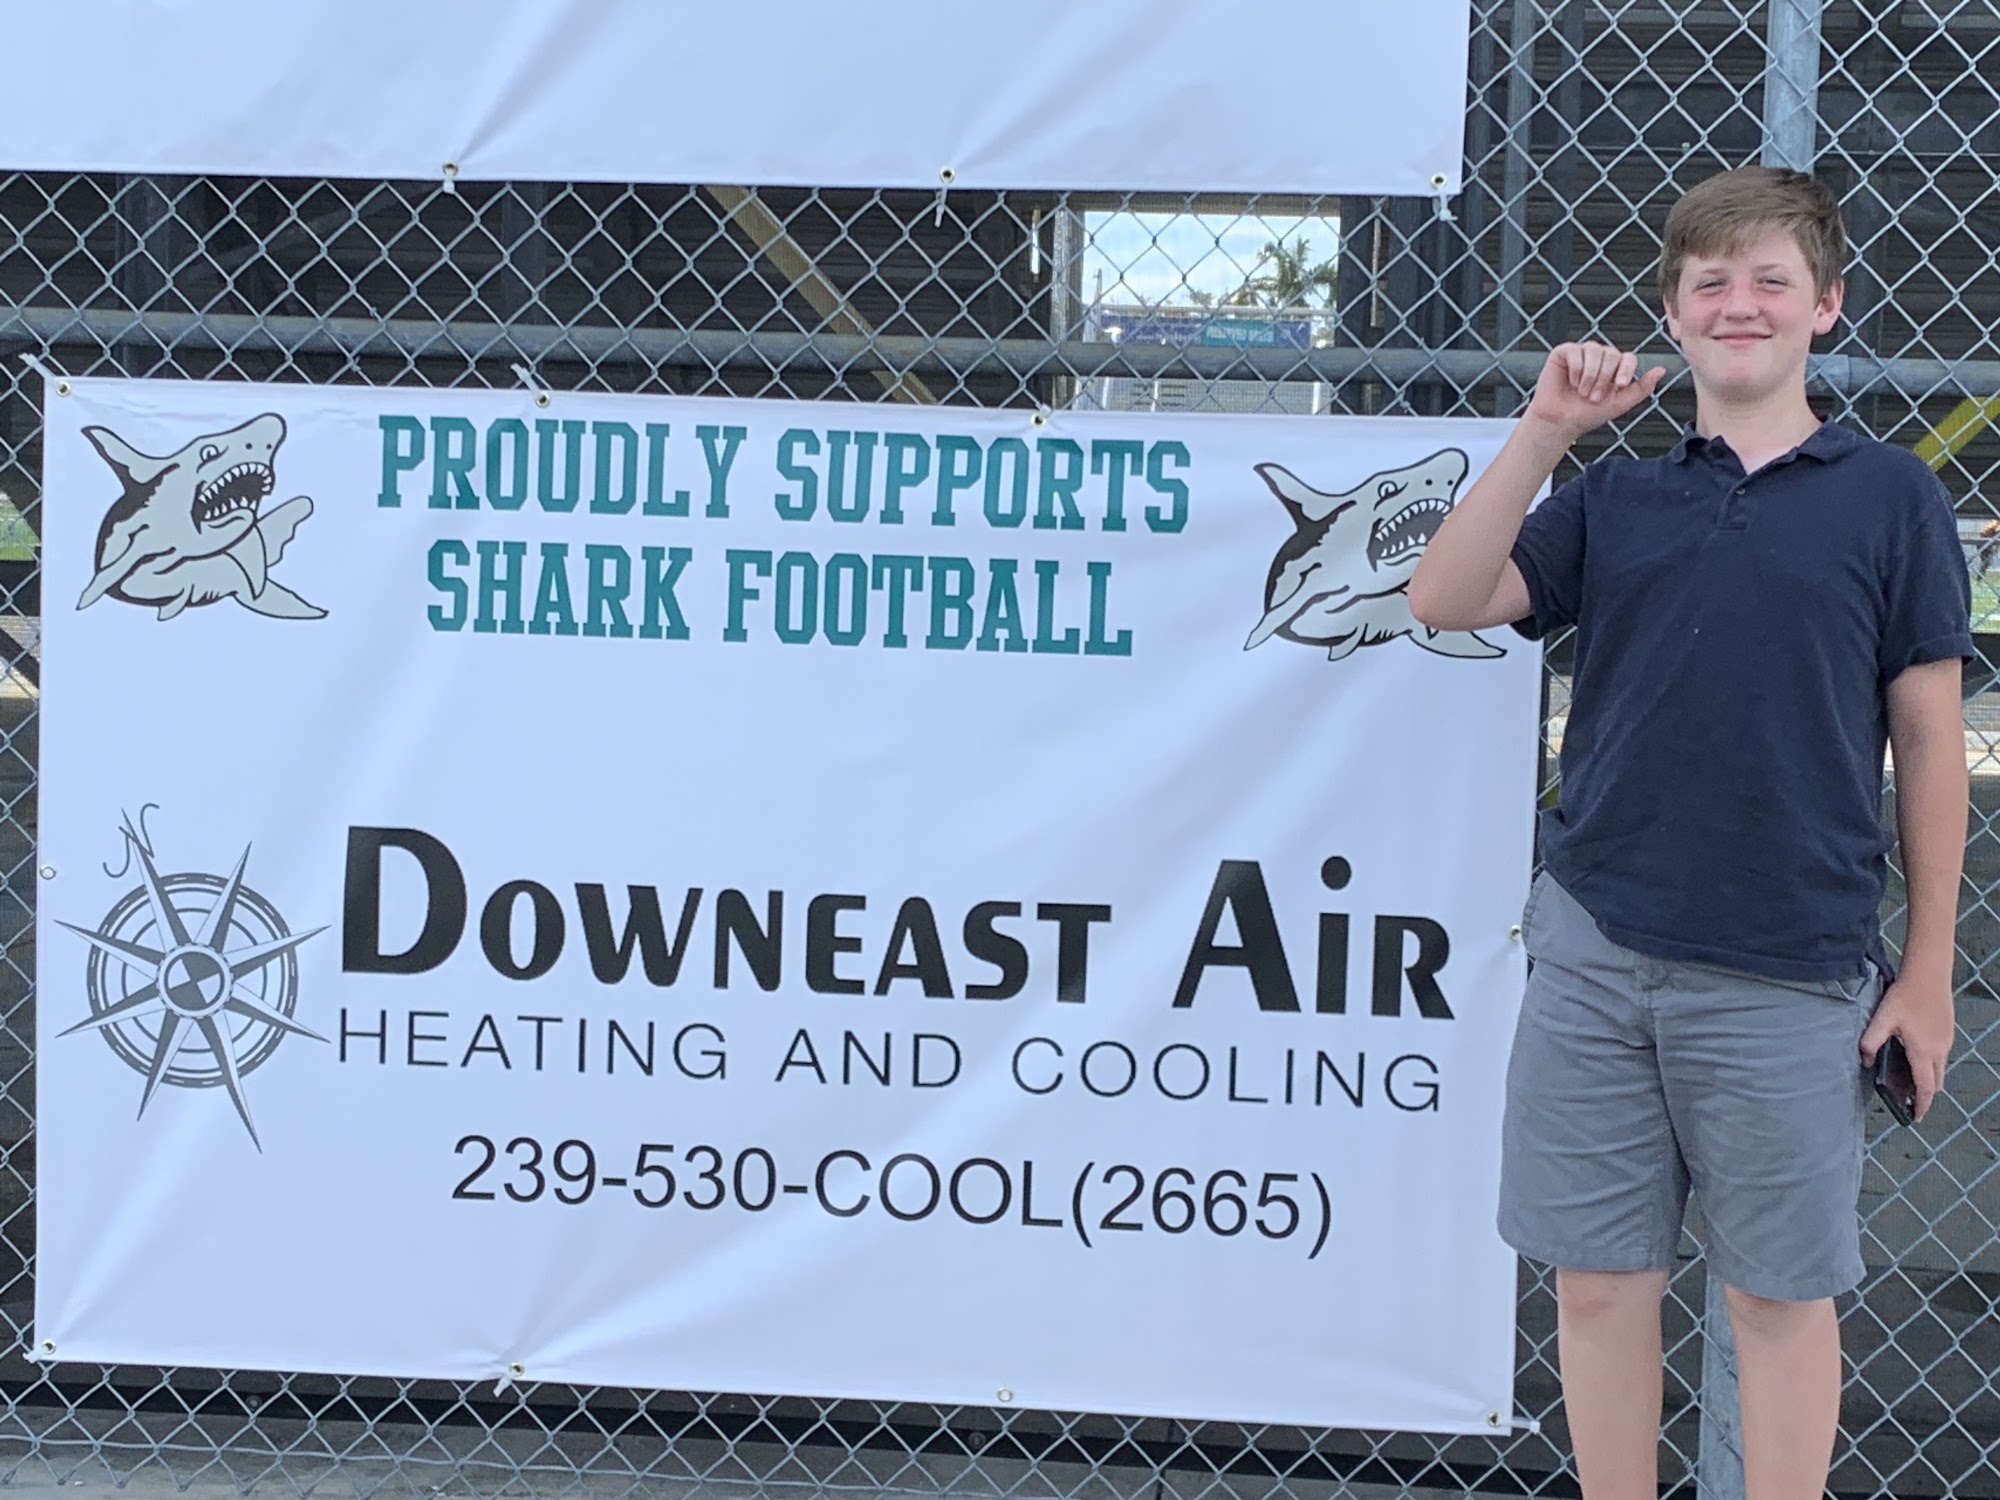 Downeast Air Heating & Cooling